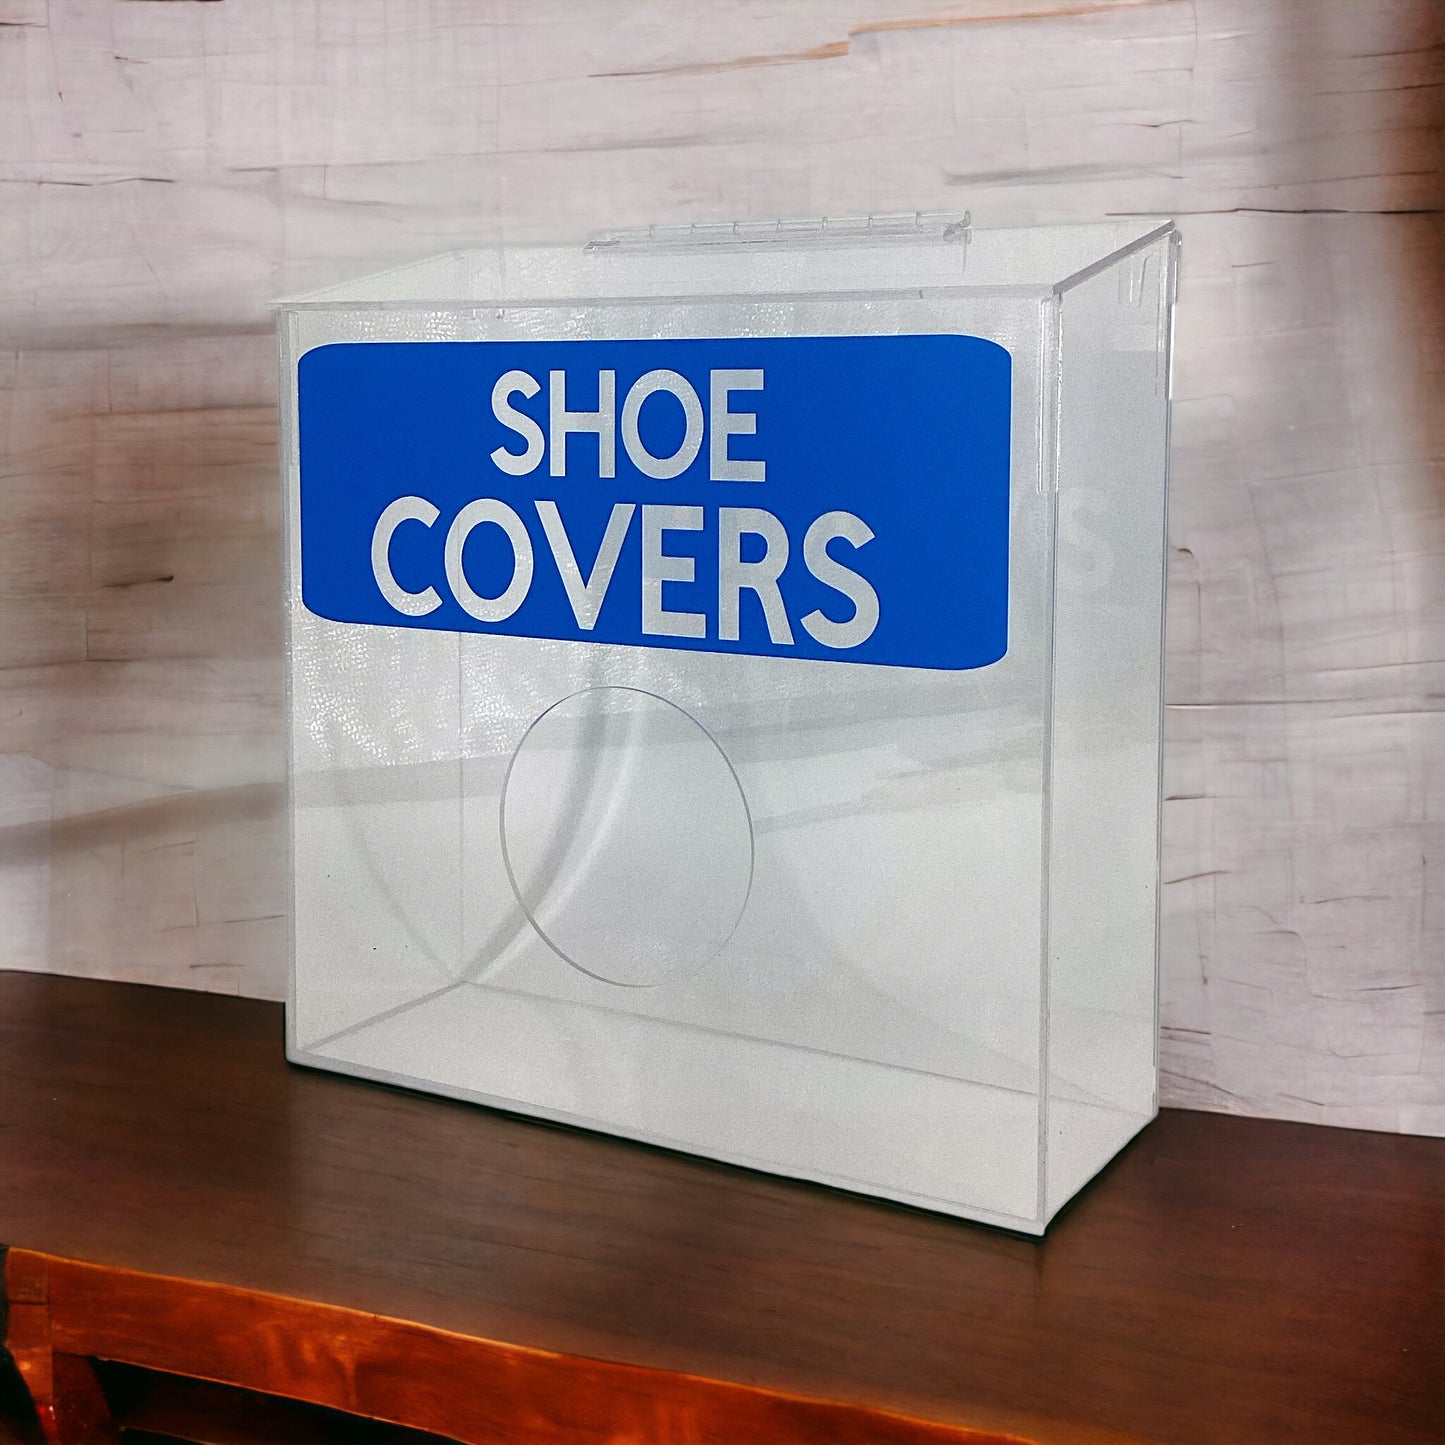 Clear Acrylic Wall Mounted Shoe Cover Storage Dispenser